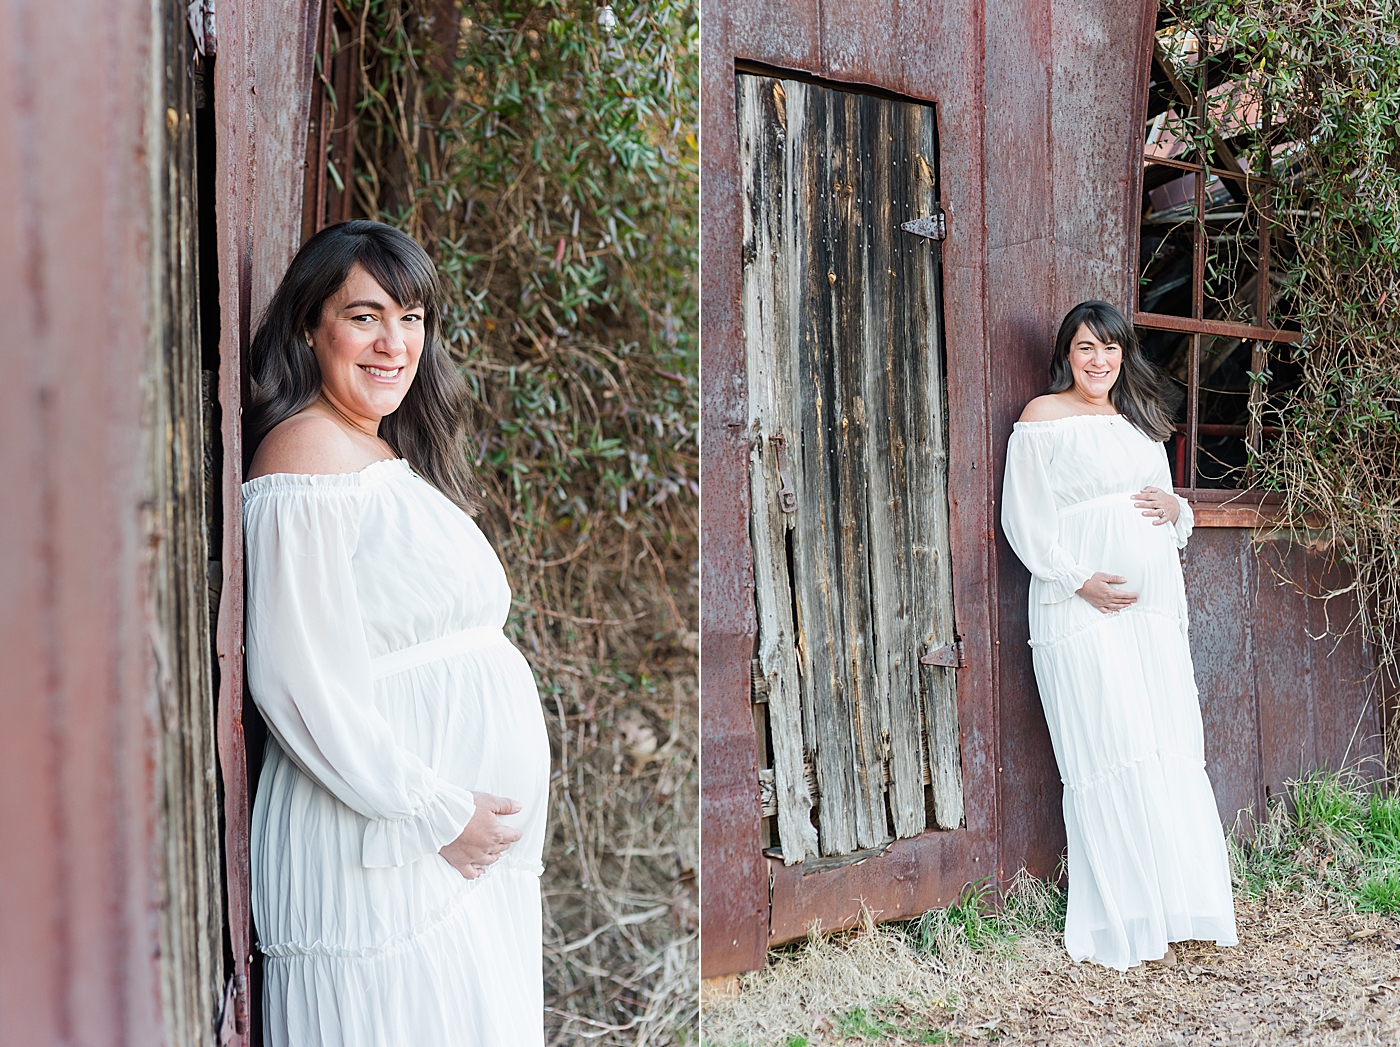 Expecting mom in long white dress near red barn | Photo by Anna Wisjo Photography